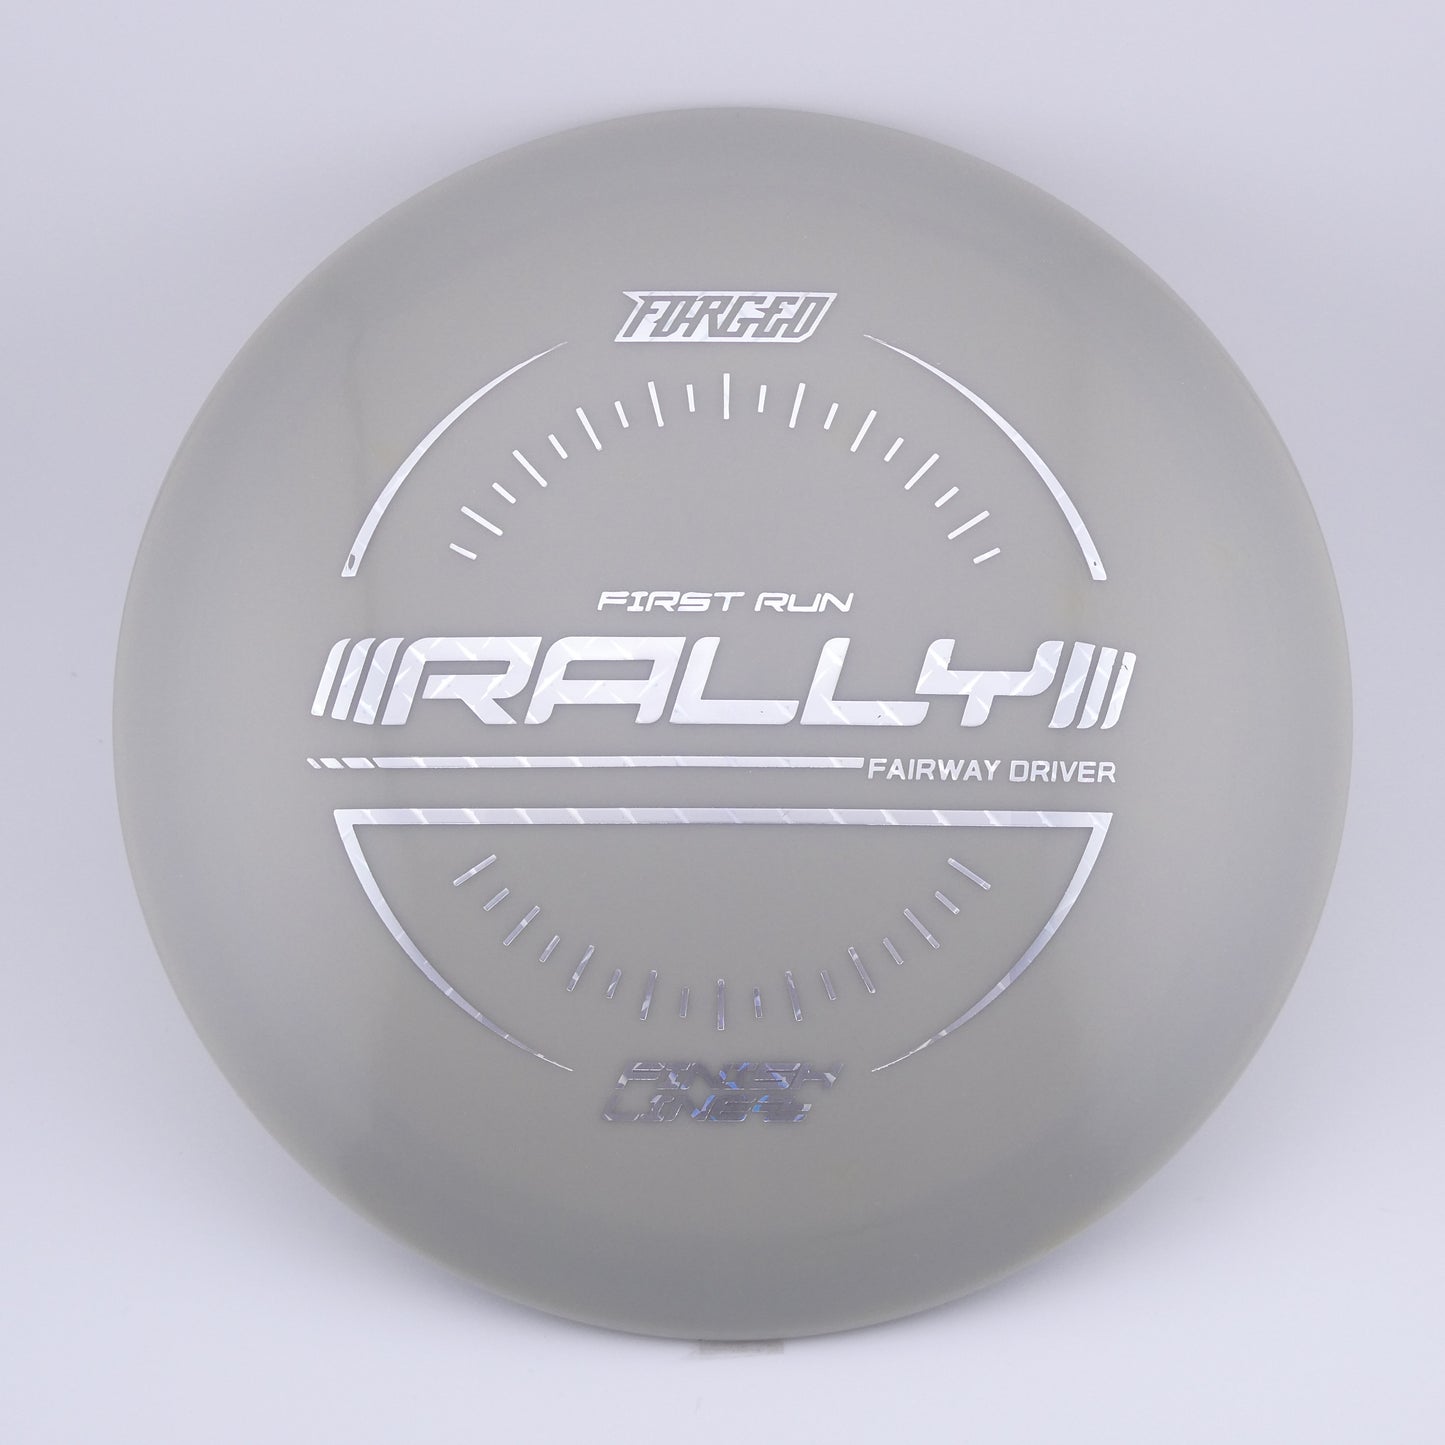 Forged Rally 173-176g